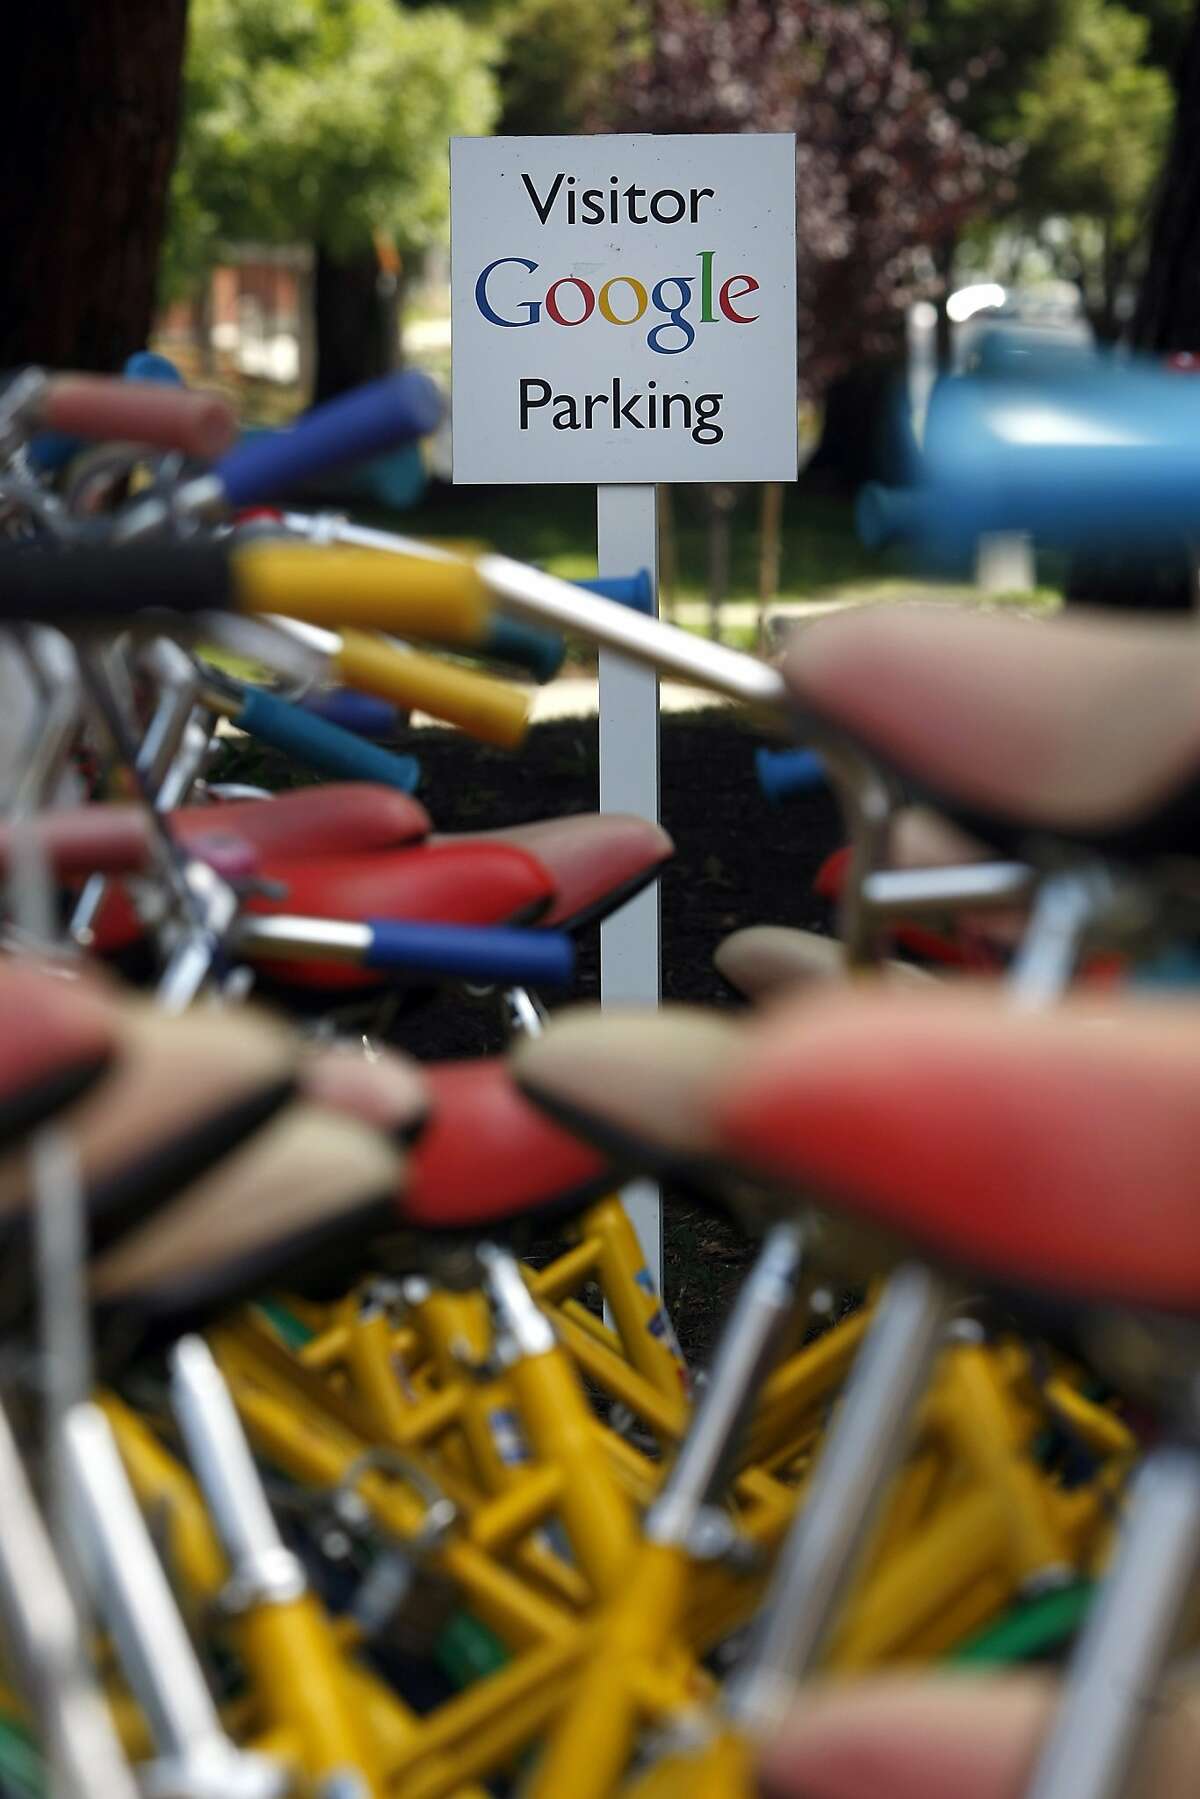 Google bikes are seen parked on the Googleplex campus in Mountain View, CA, Saturday May 24, 2014.